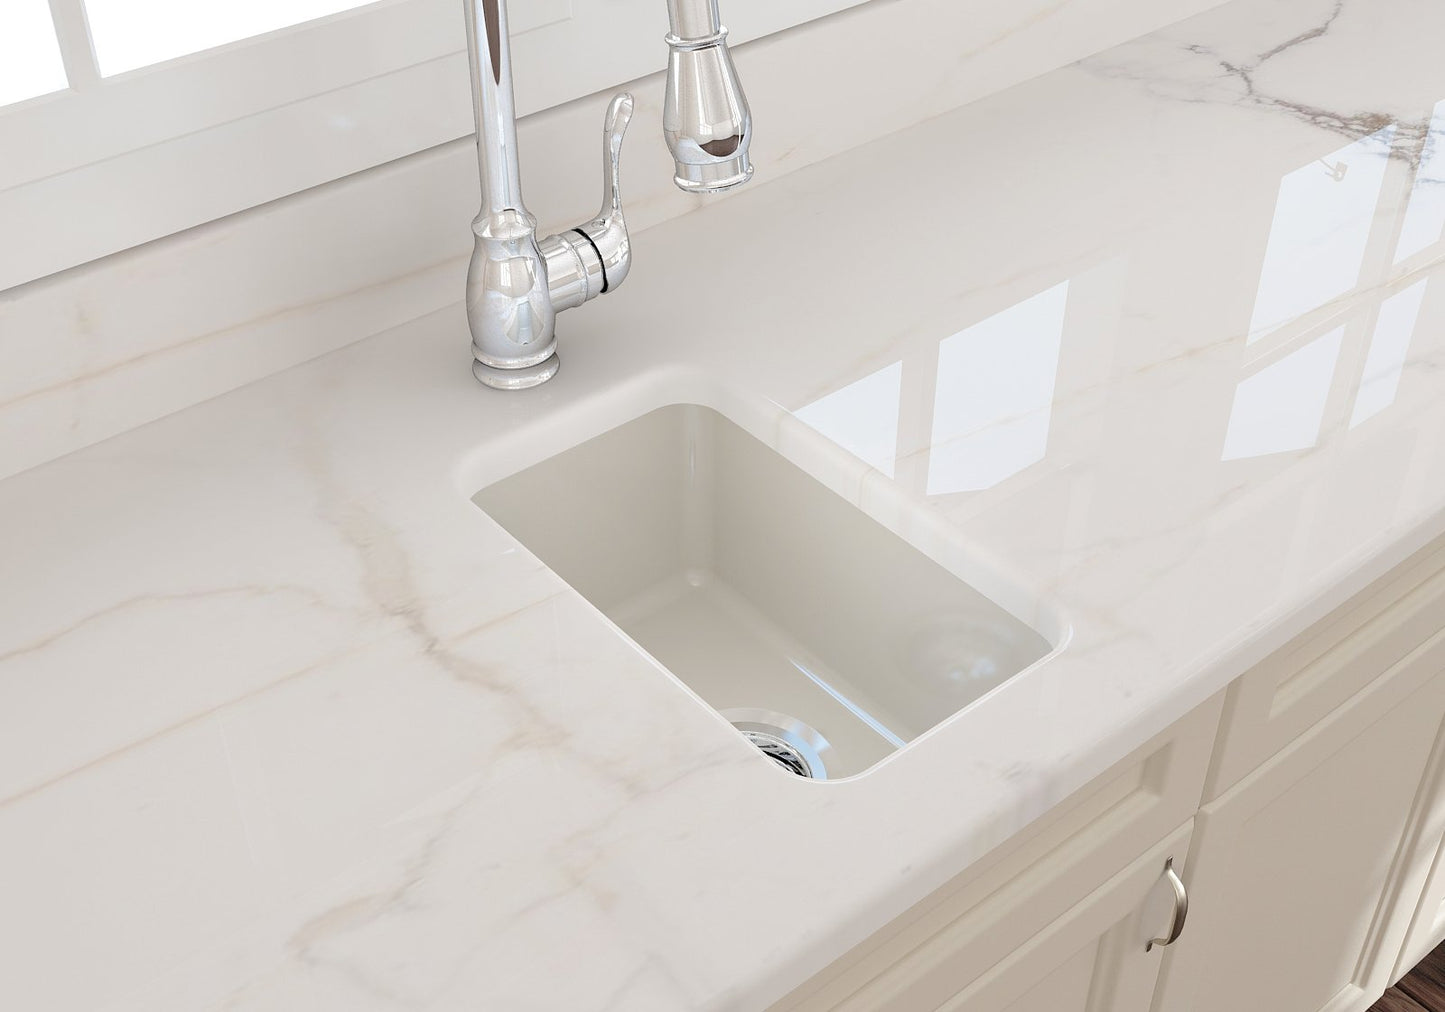 Bocchi Undermount Fireclay 12" Single Bowl Kitchen Sink (Call for special pricing)